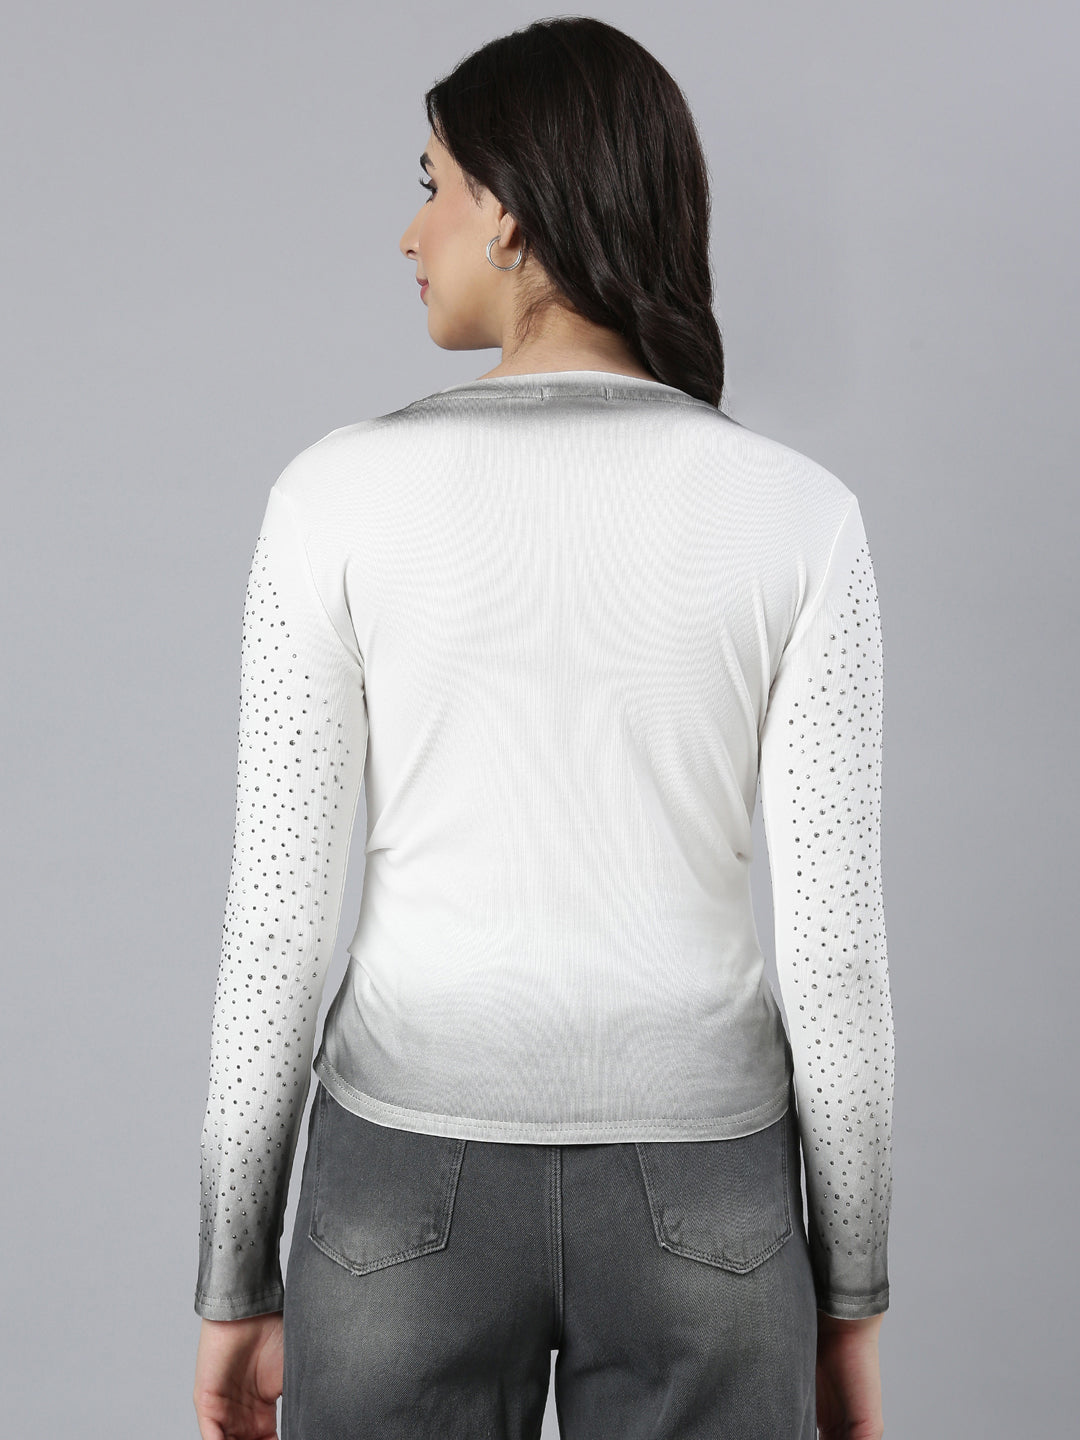 Women Embellished White Fitted Top